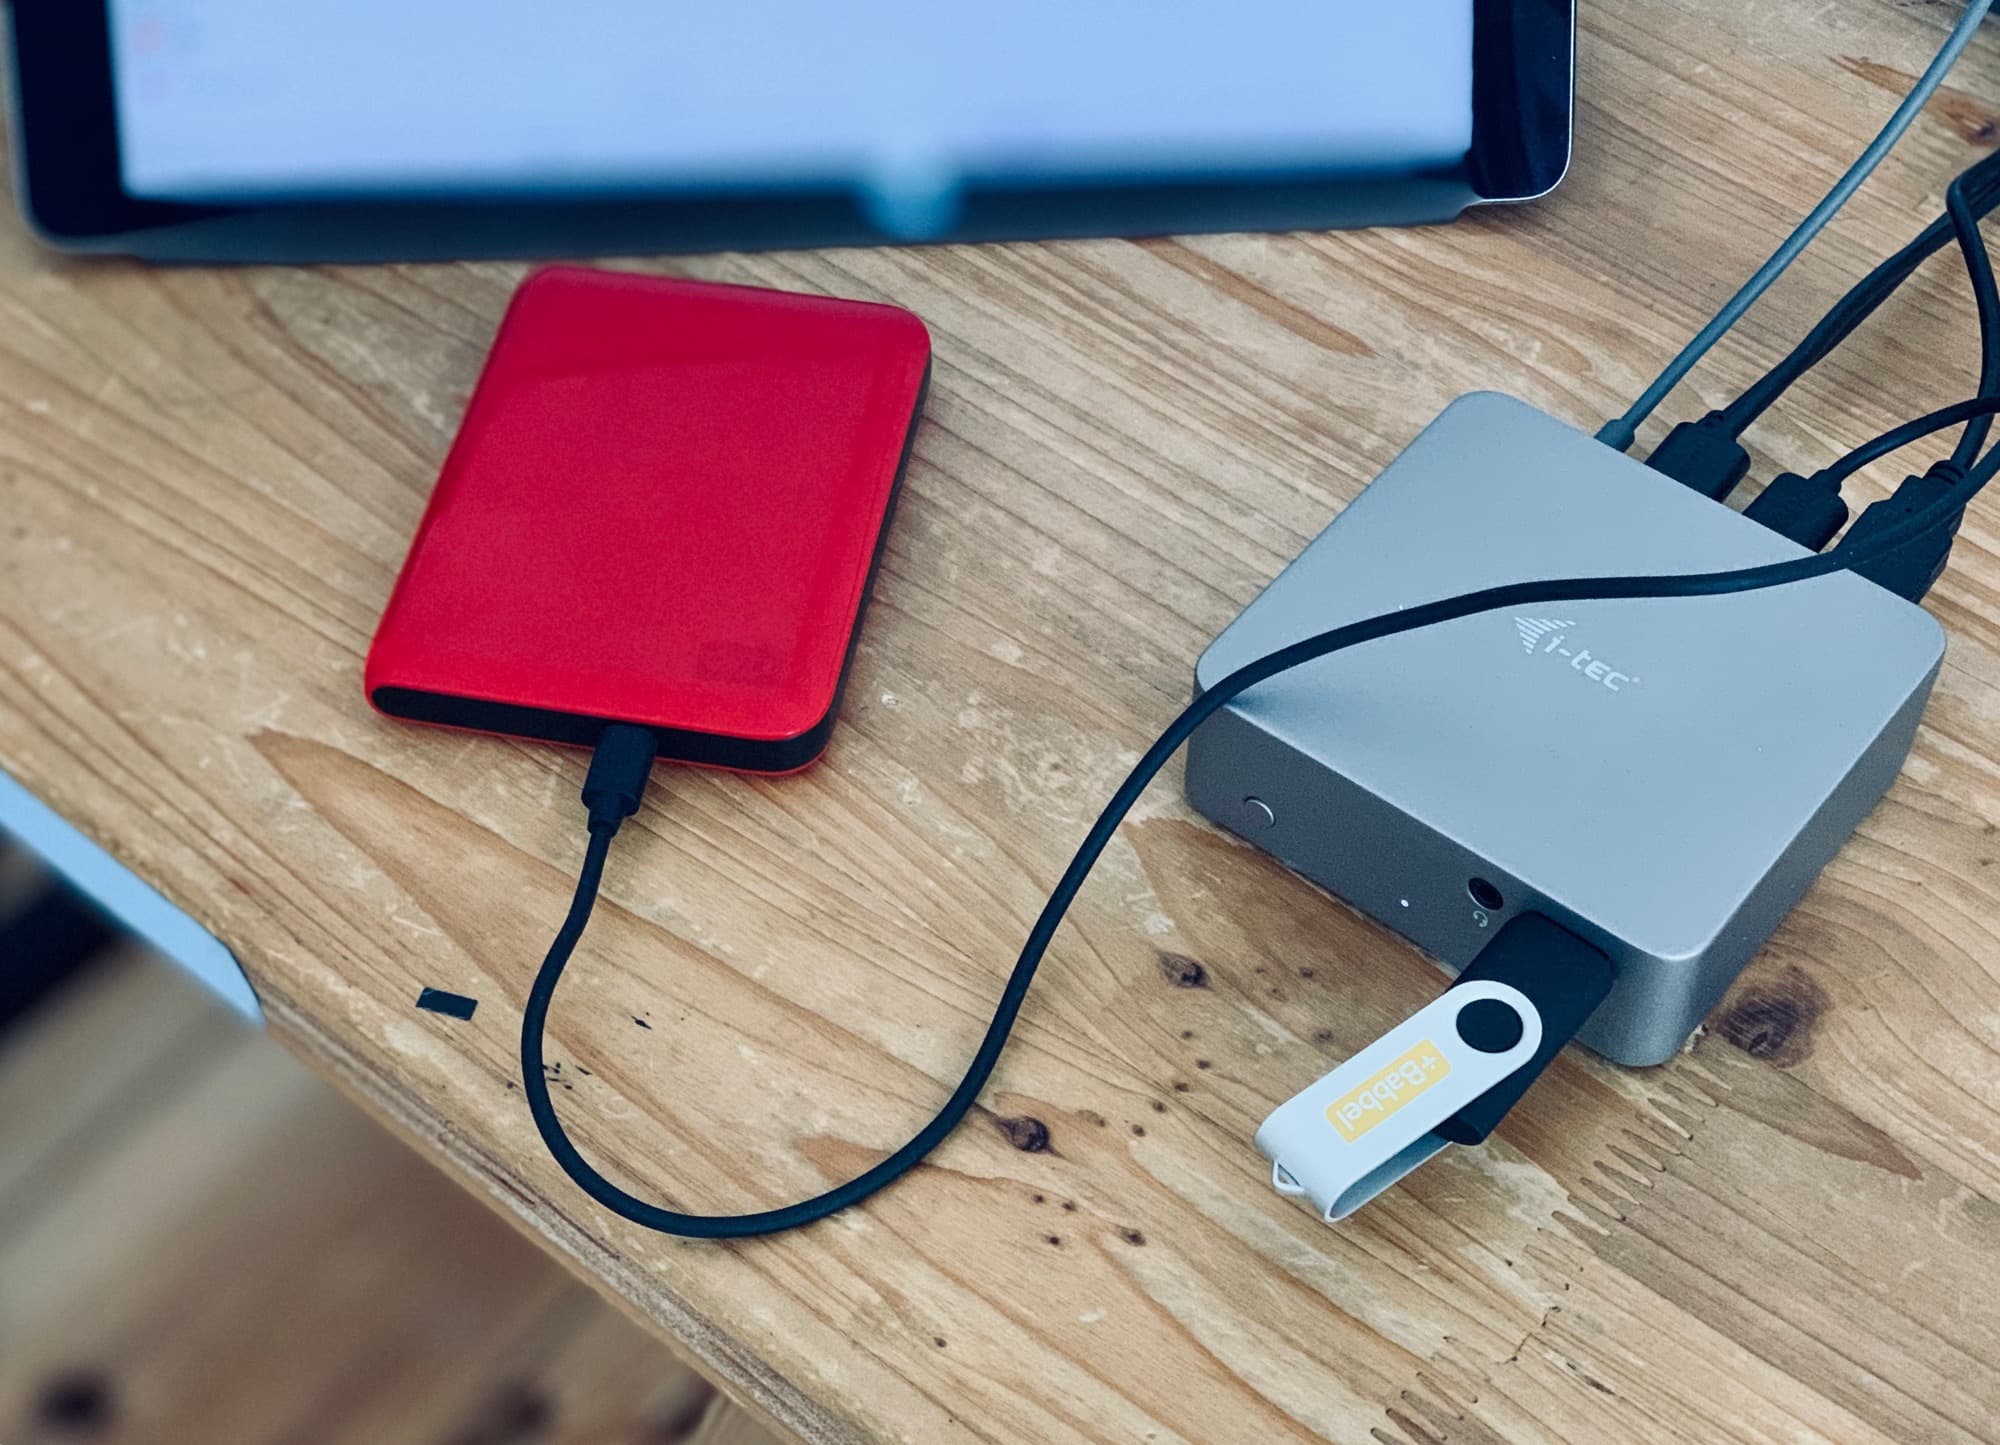 Finally! The Files app gains USB storage support in iPadOS.